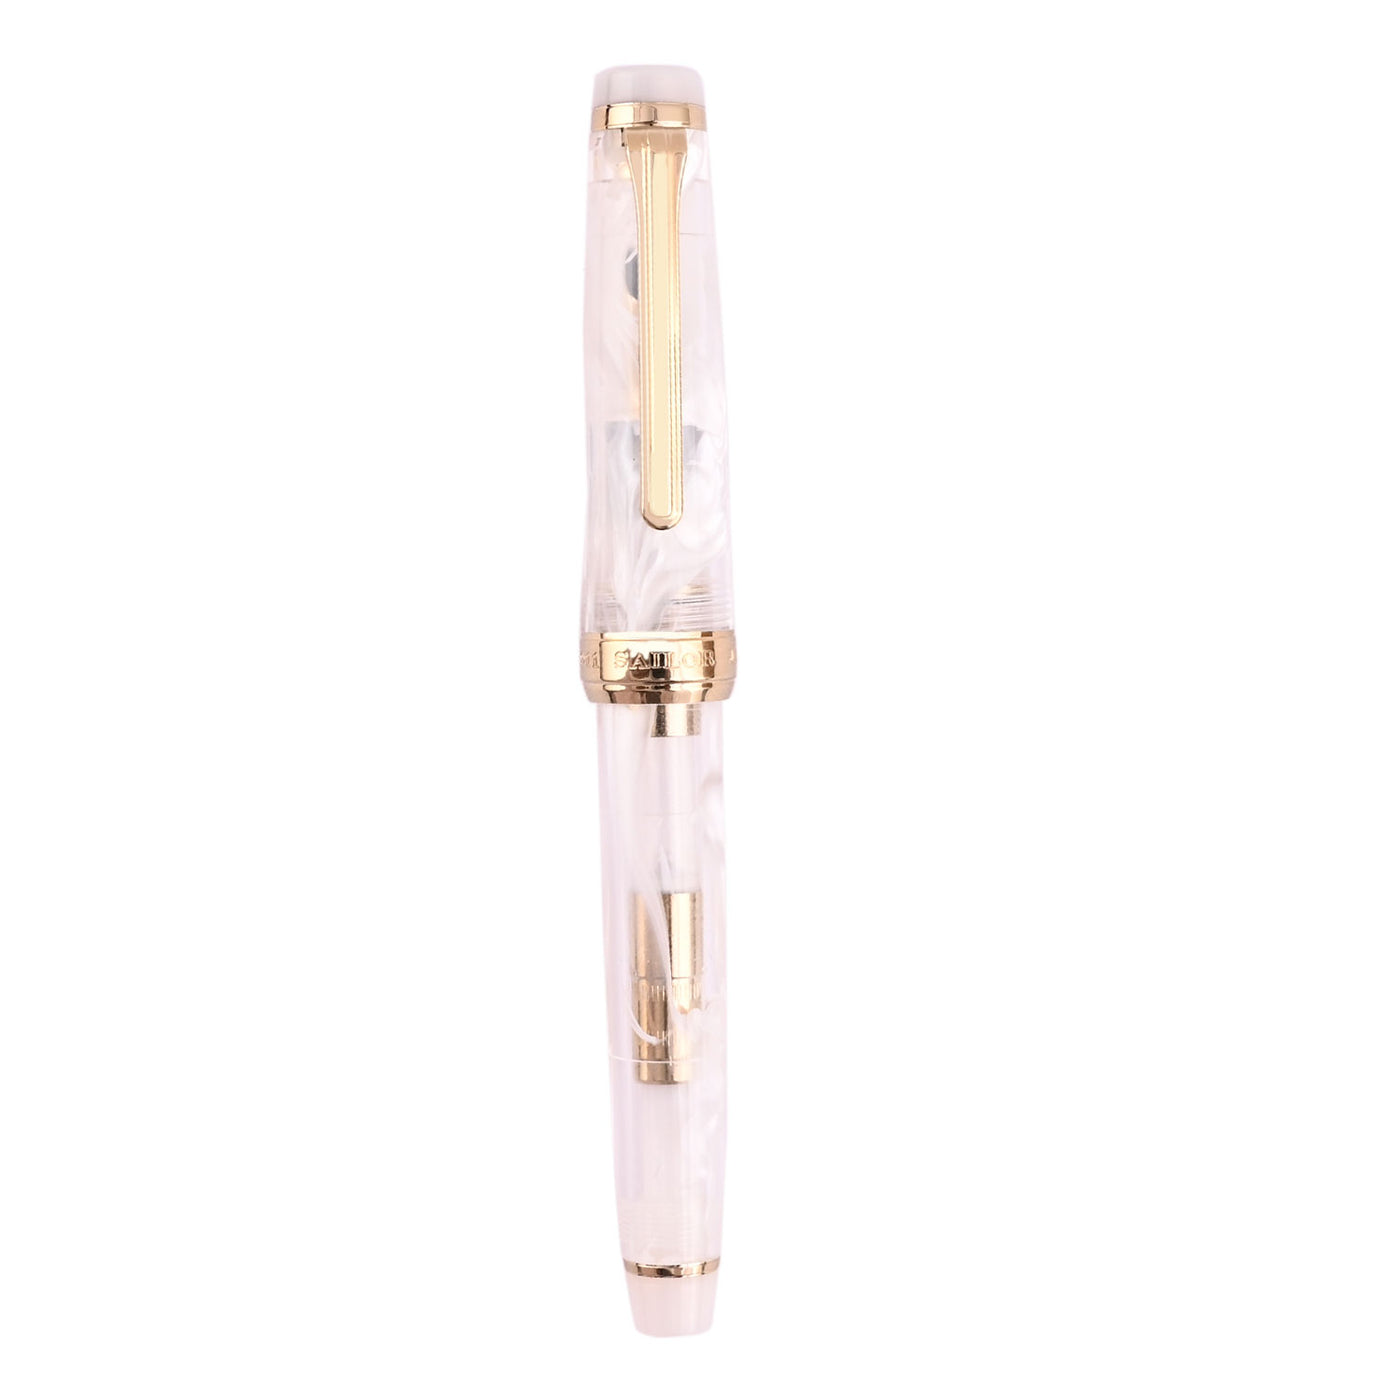 Sailor Professional Gear Slim Veilio Fountain Pen Pearl White GT (Limited Production) 5